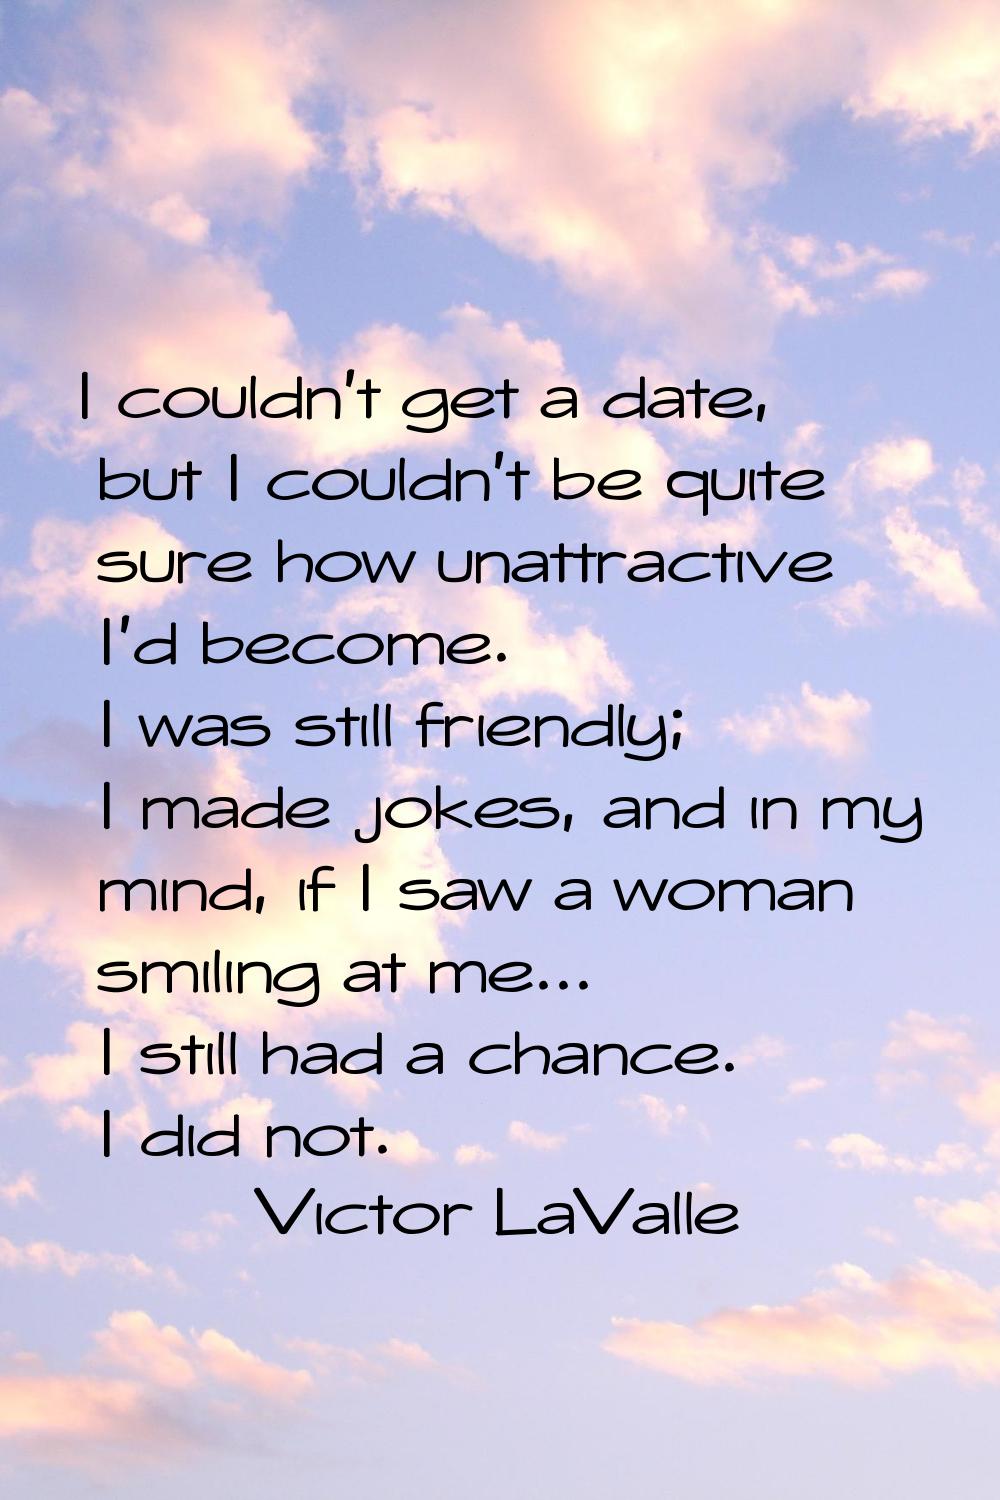 I couldn't get a date, but I couldn't be quite sure how unattractive I'd become. I was still friend